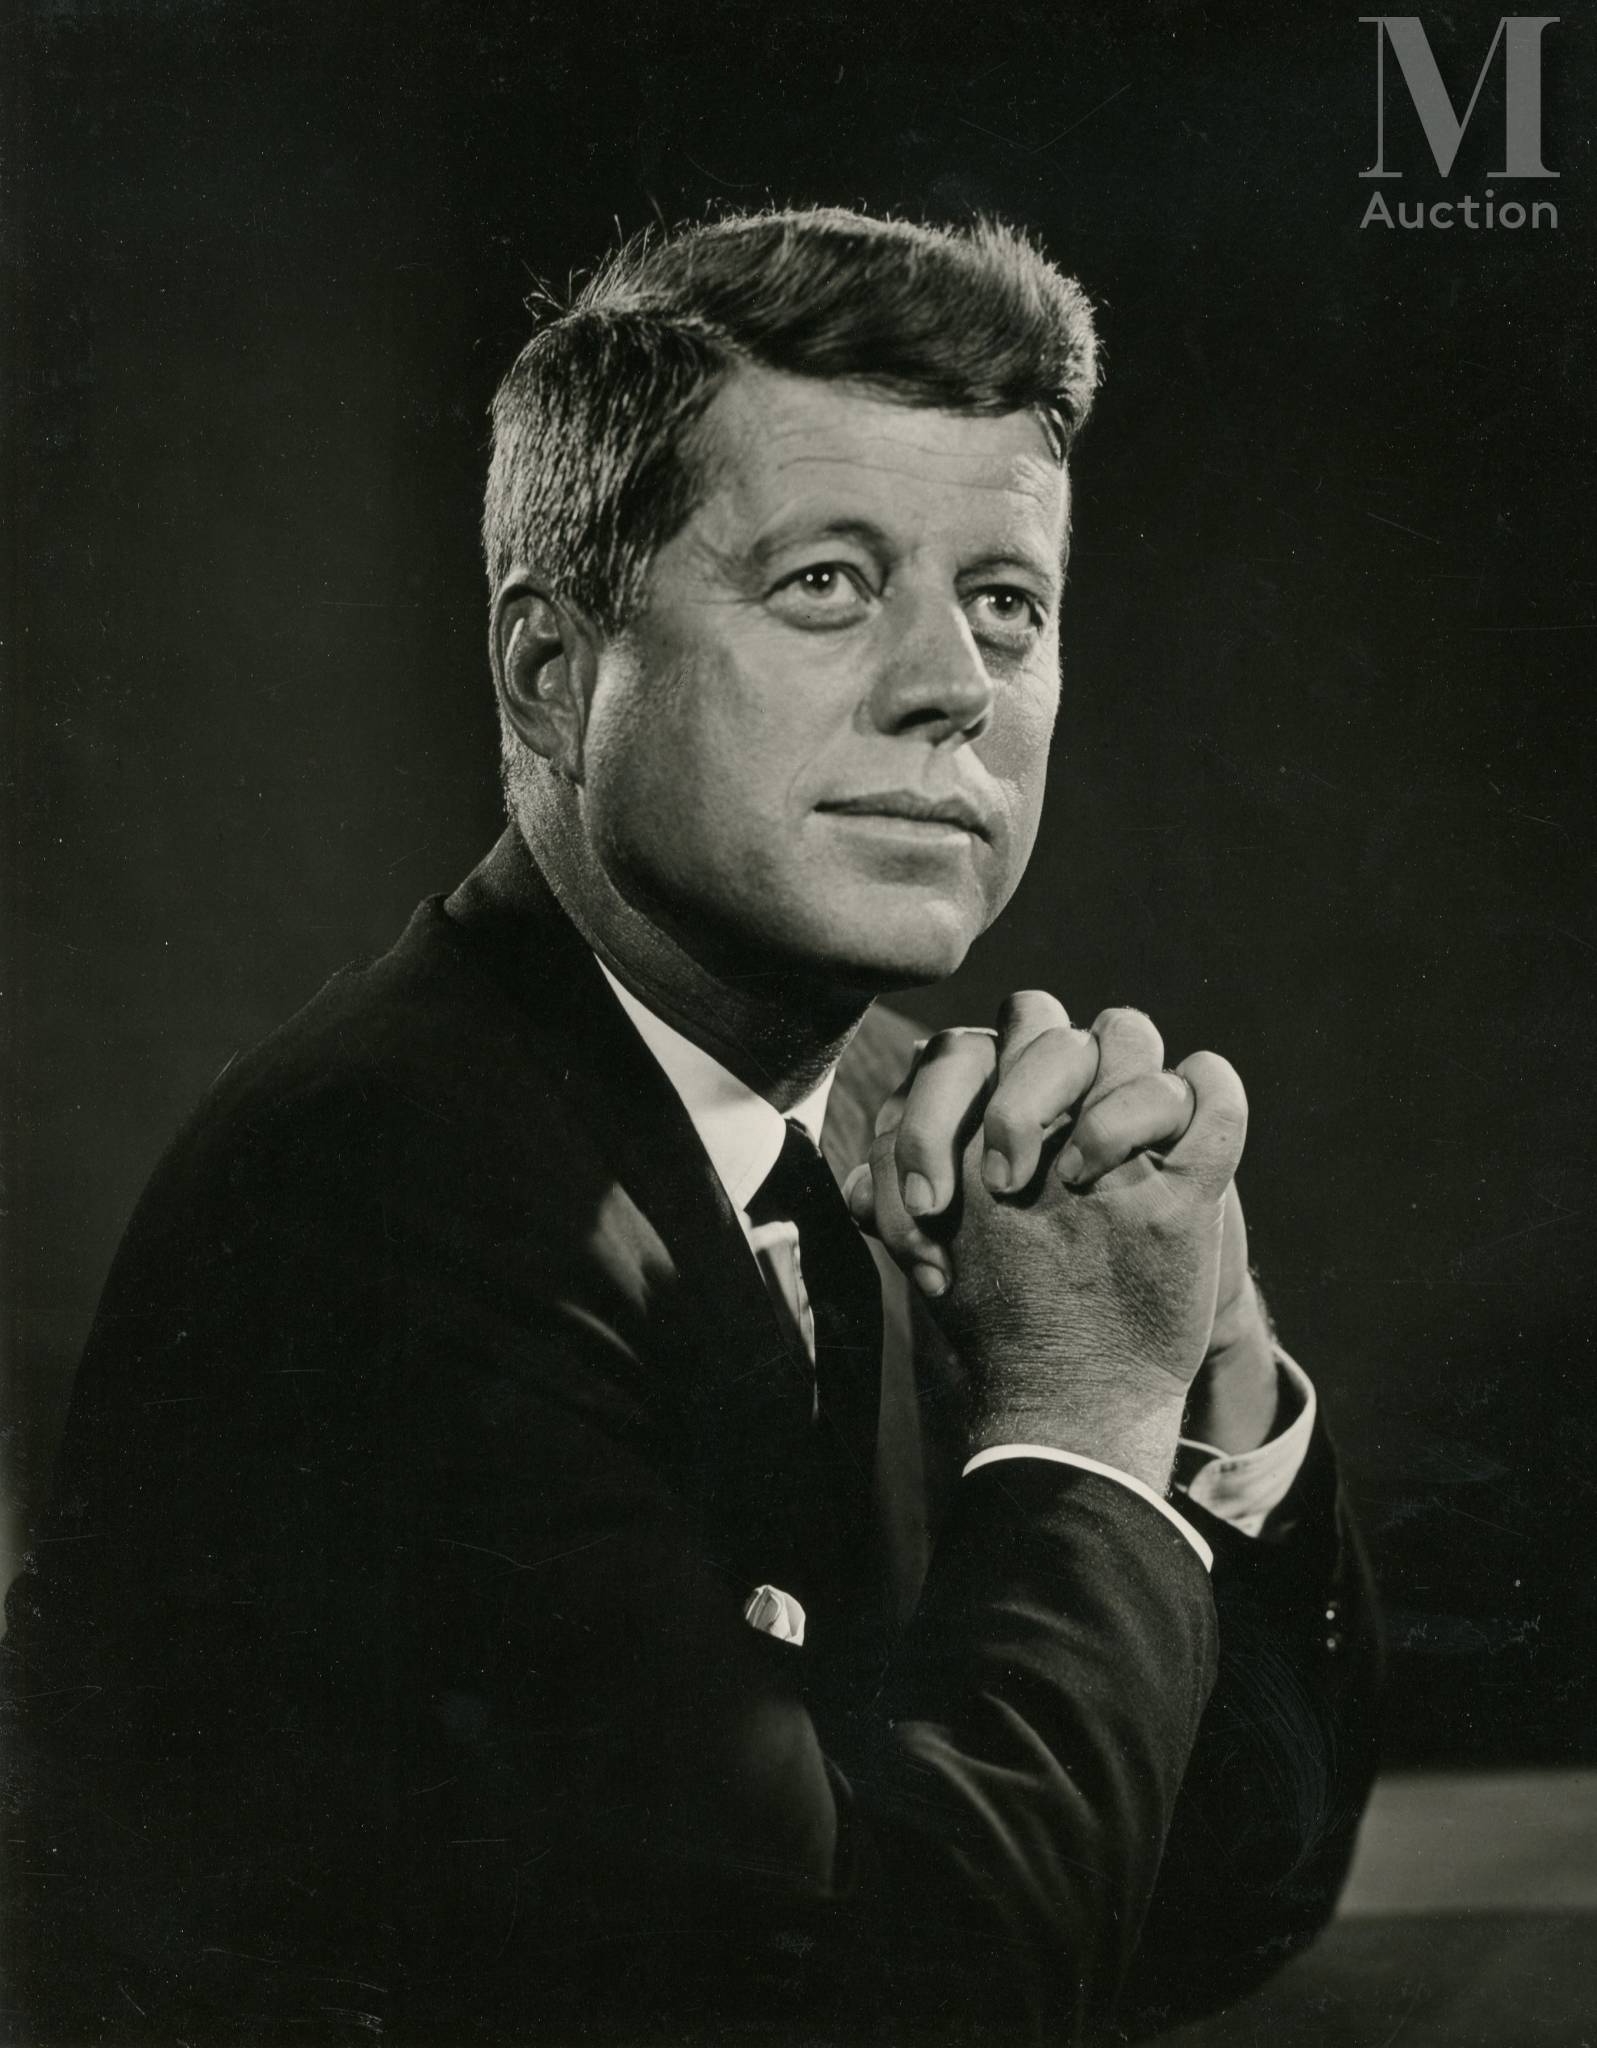 Artwork by Yousuf Karsh, John F. Kennedy, Made of Vintage silver print mounted on cardboard